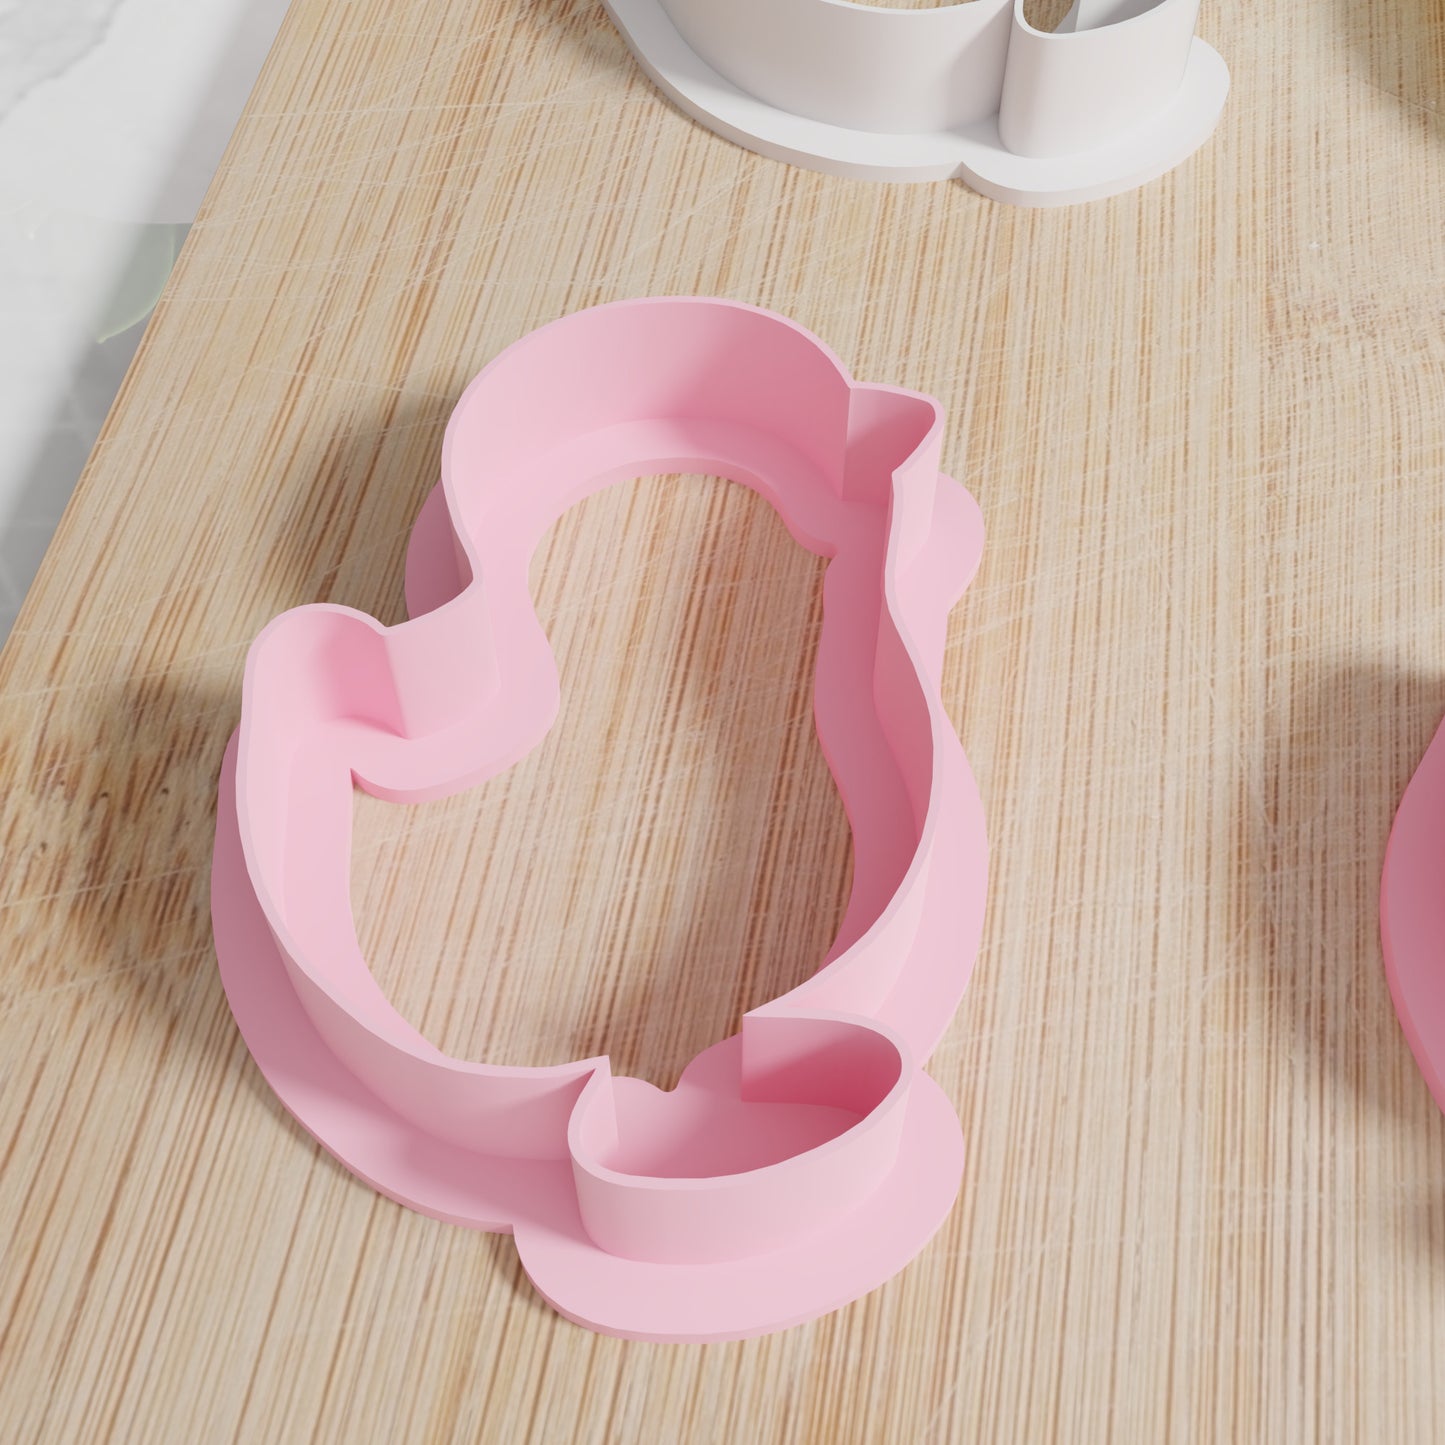 Easter Chick Cookie Cutter Set. Matches Others In Our Easter Collection. Super Cute Easter Chick Cookie Cutter